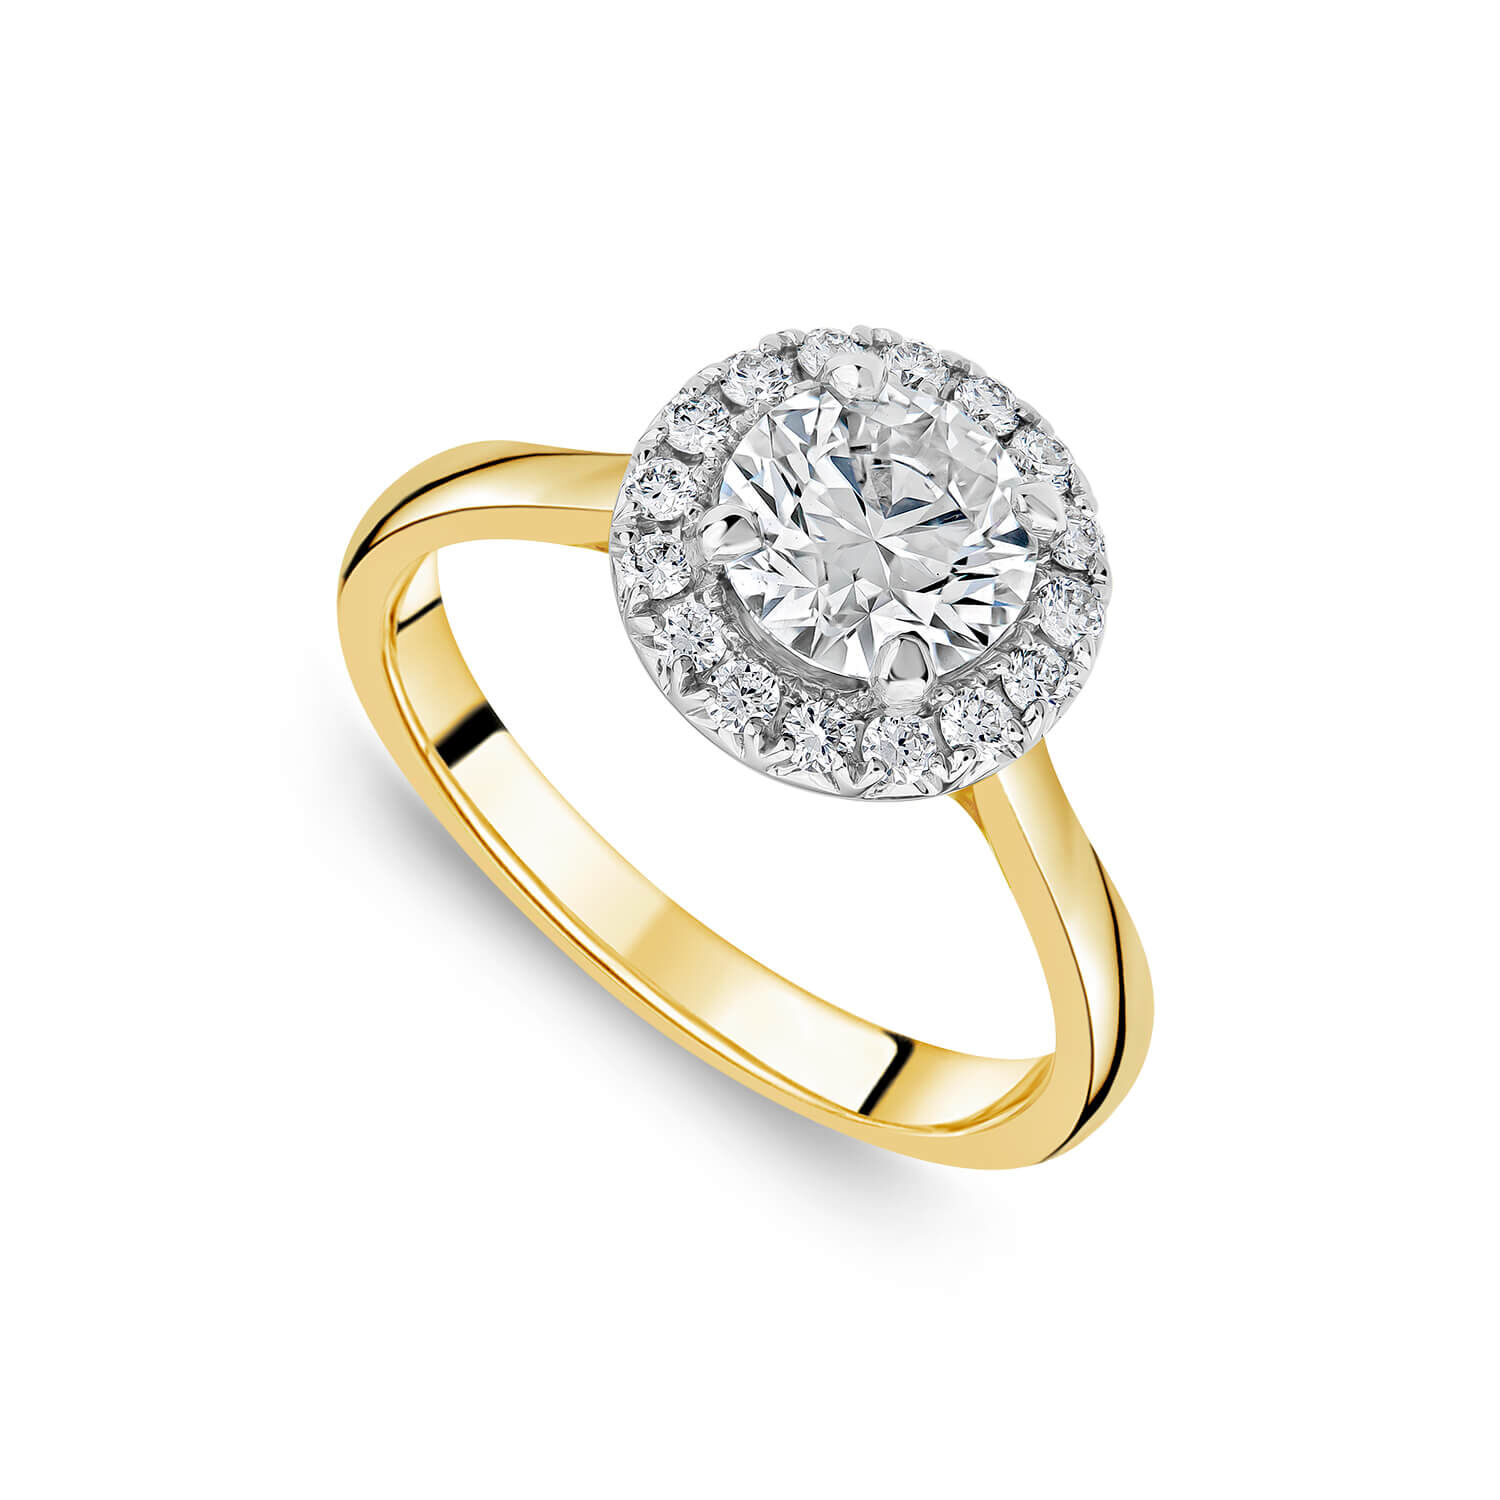 Born 18ct Yellow Gold 2ct 3 Stone Oval Diamond Ring at Fraser Hart